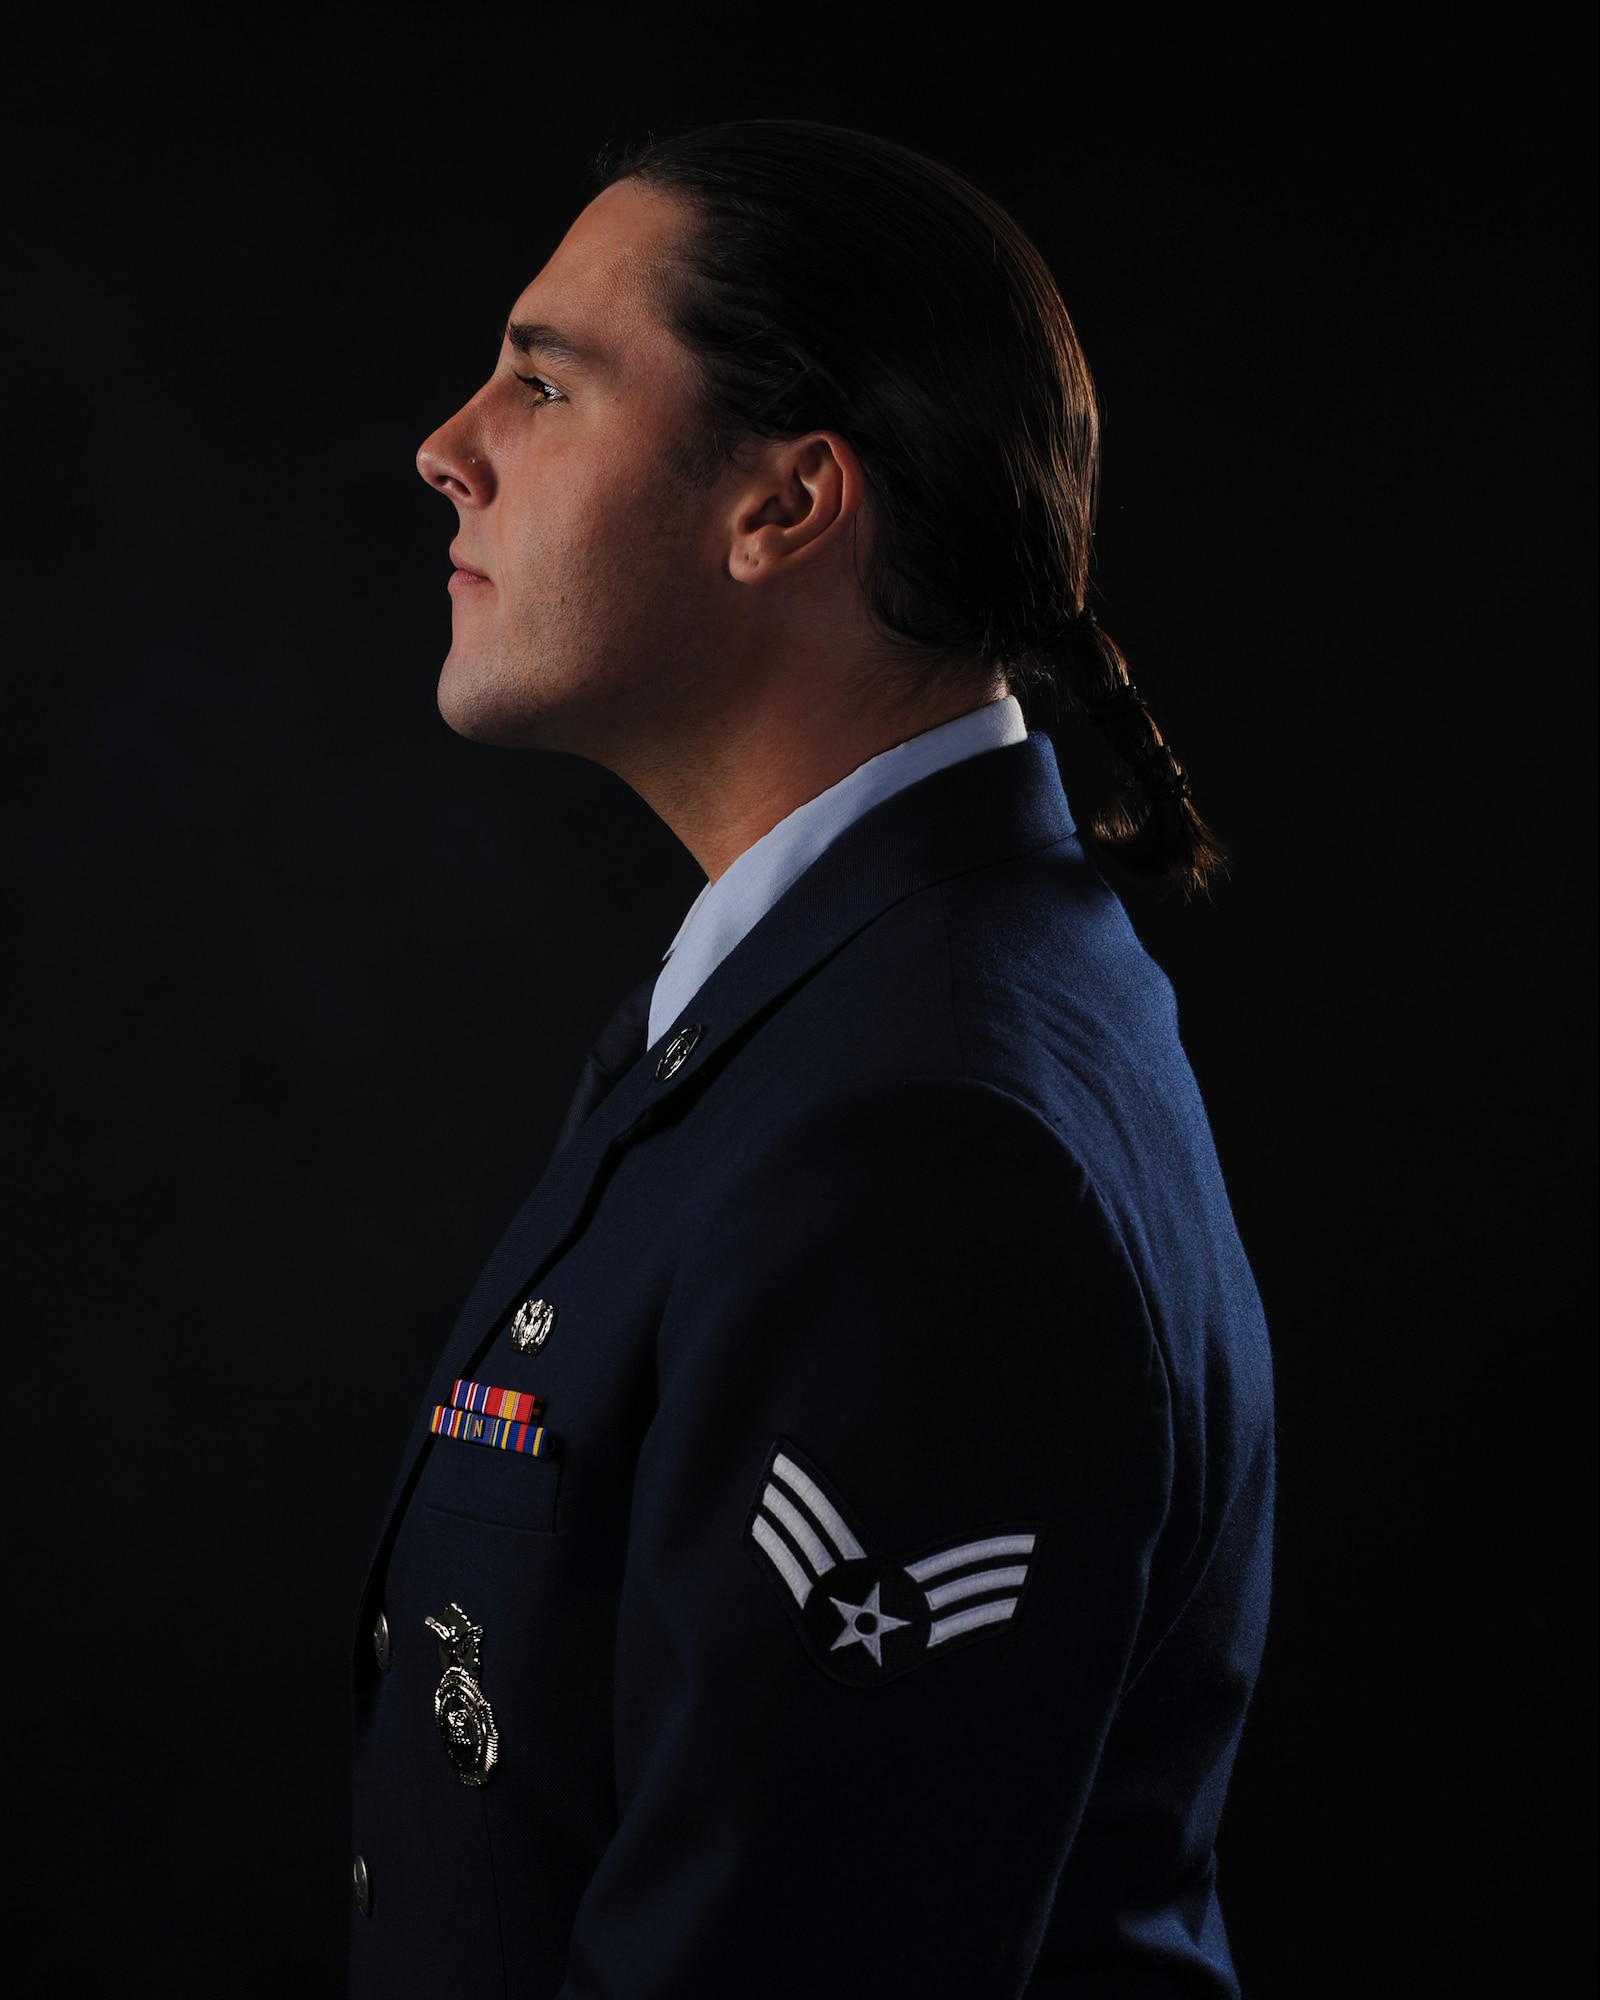 The side profile of a man in dark blue military service dress, with a braid growing just past the bottom of his collar.